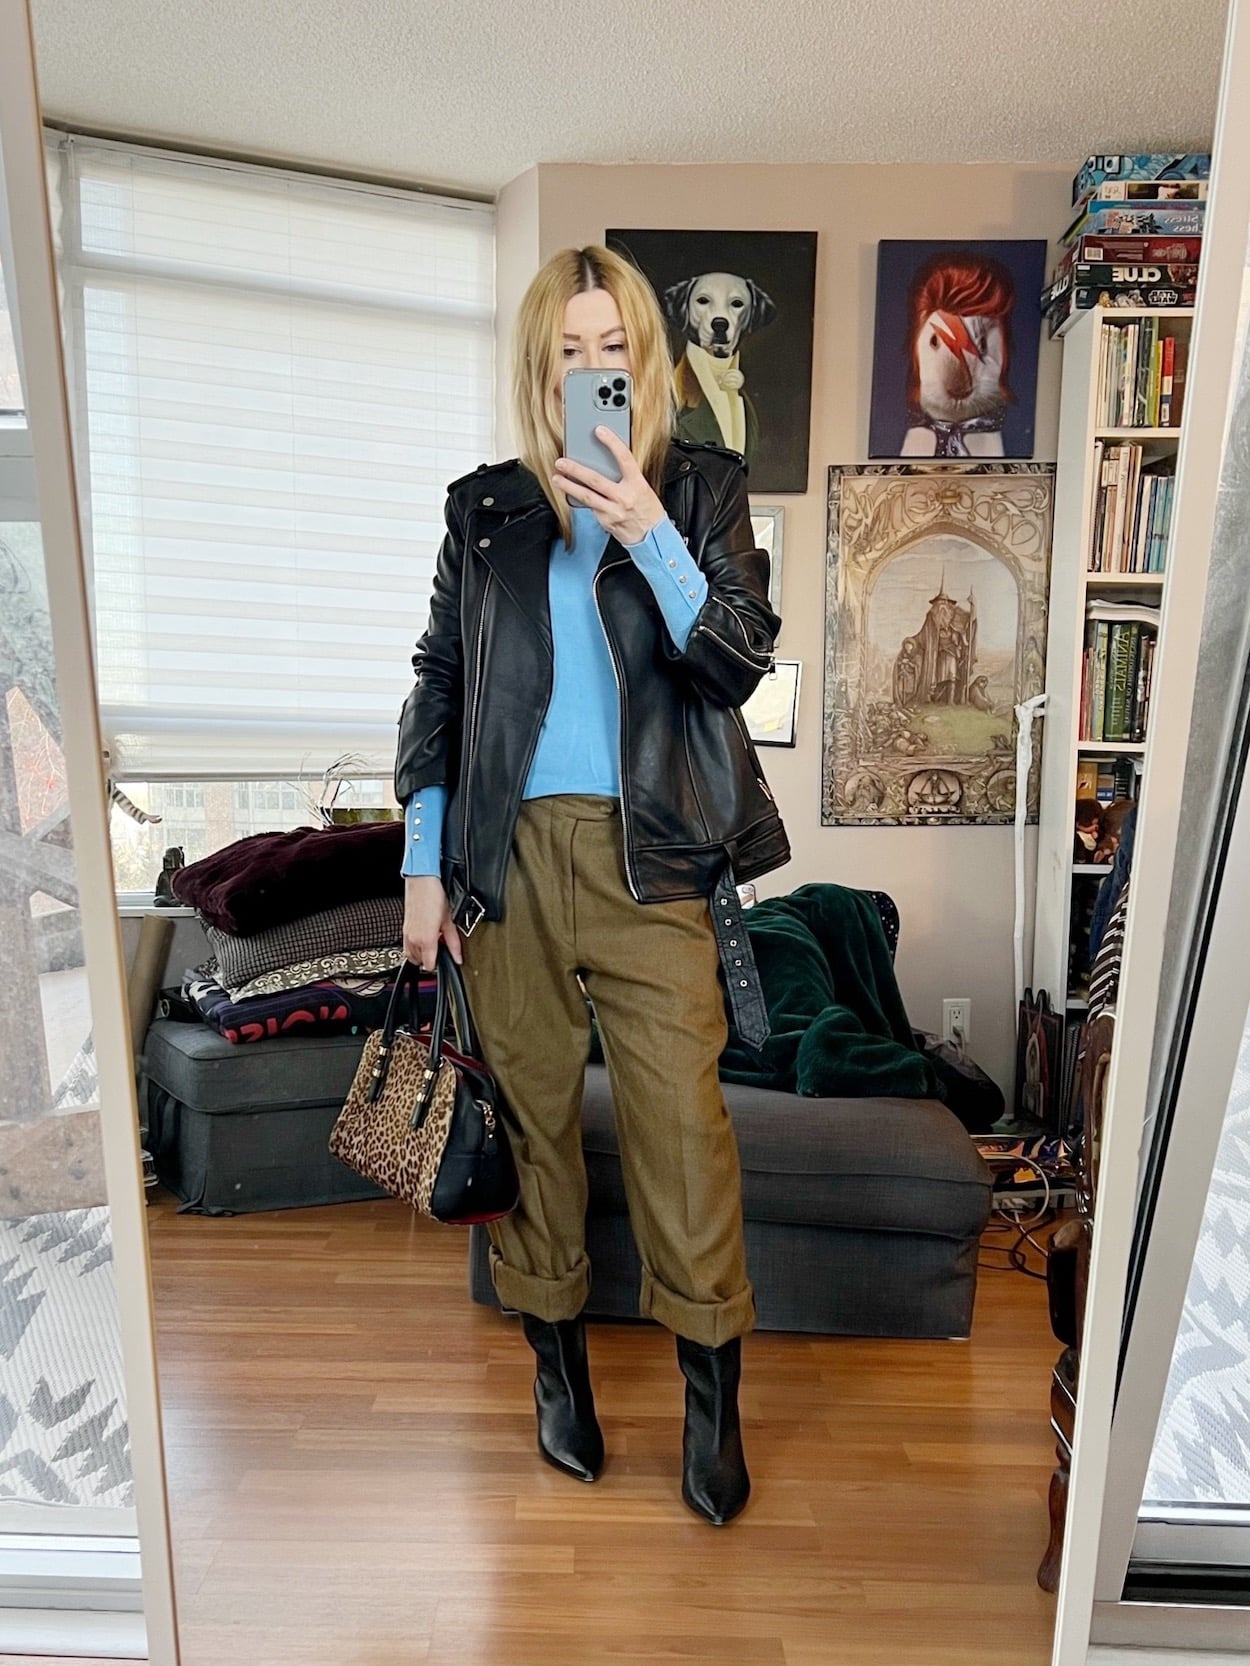 A blonde woman is wearing a light blue sweater, brown vintage trousers, knee high boots, a leather jacket, and is carrying an animal print bag.